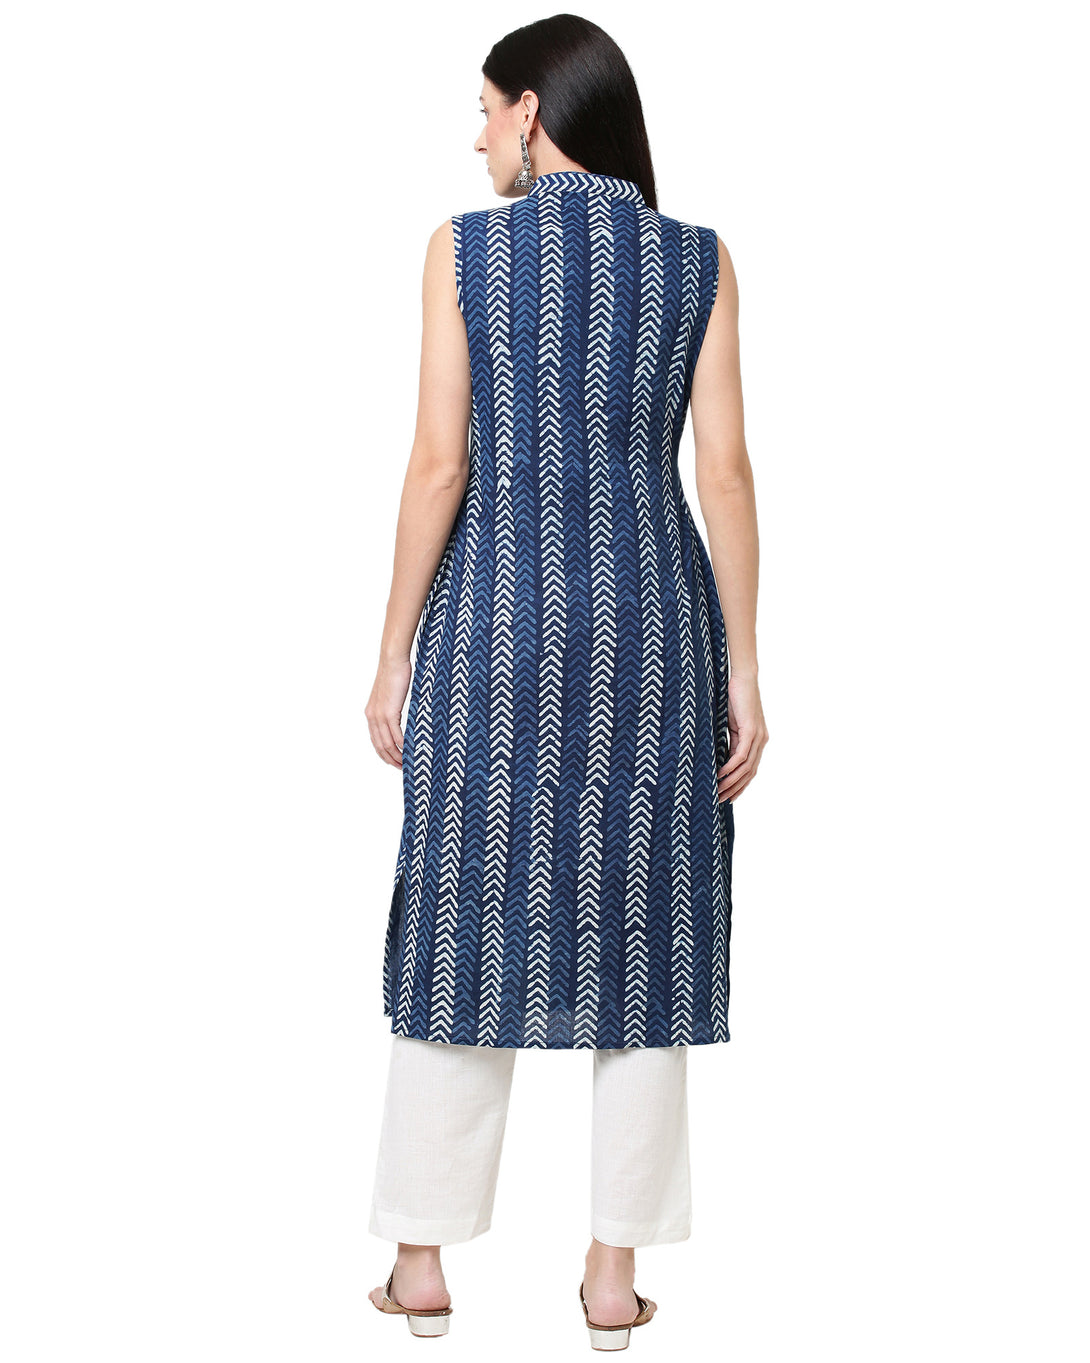 Skin friendly and eco friendly latest kurta in pure cotton